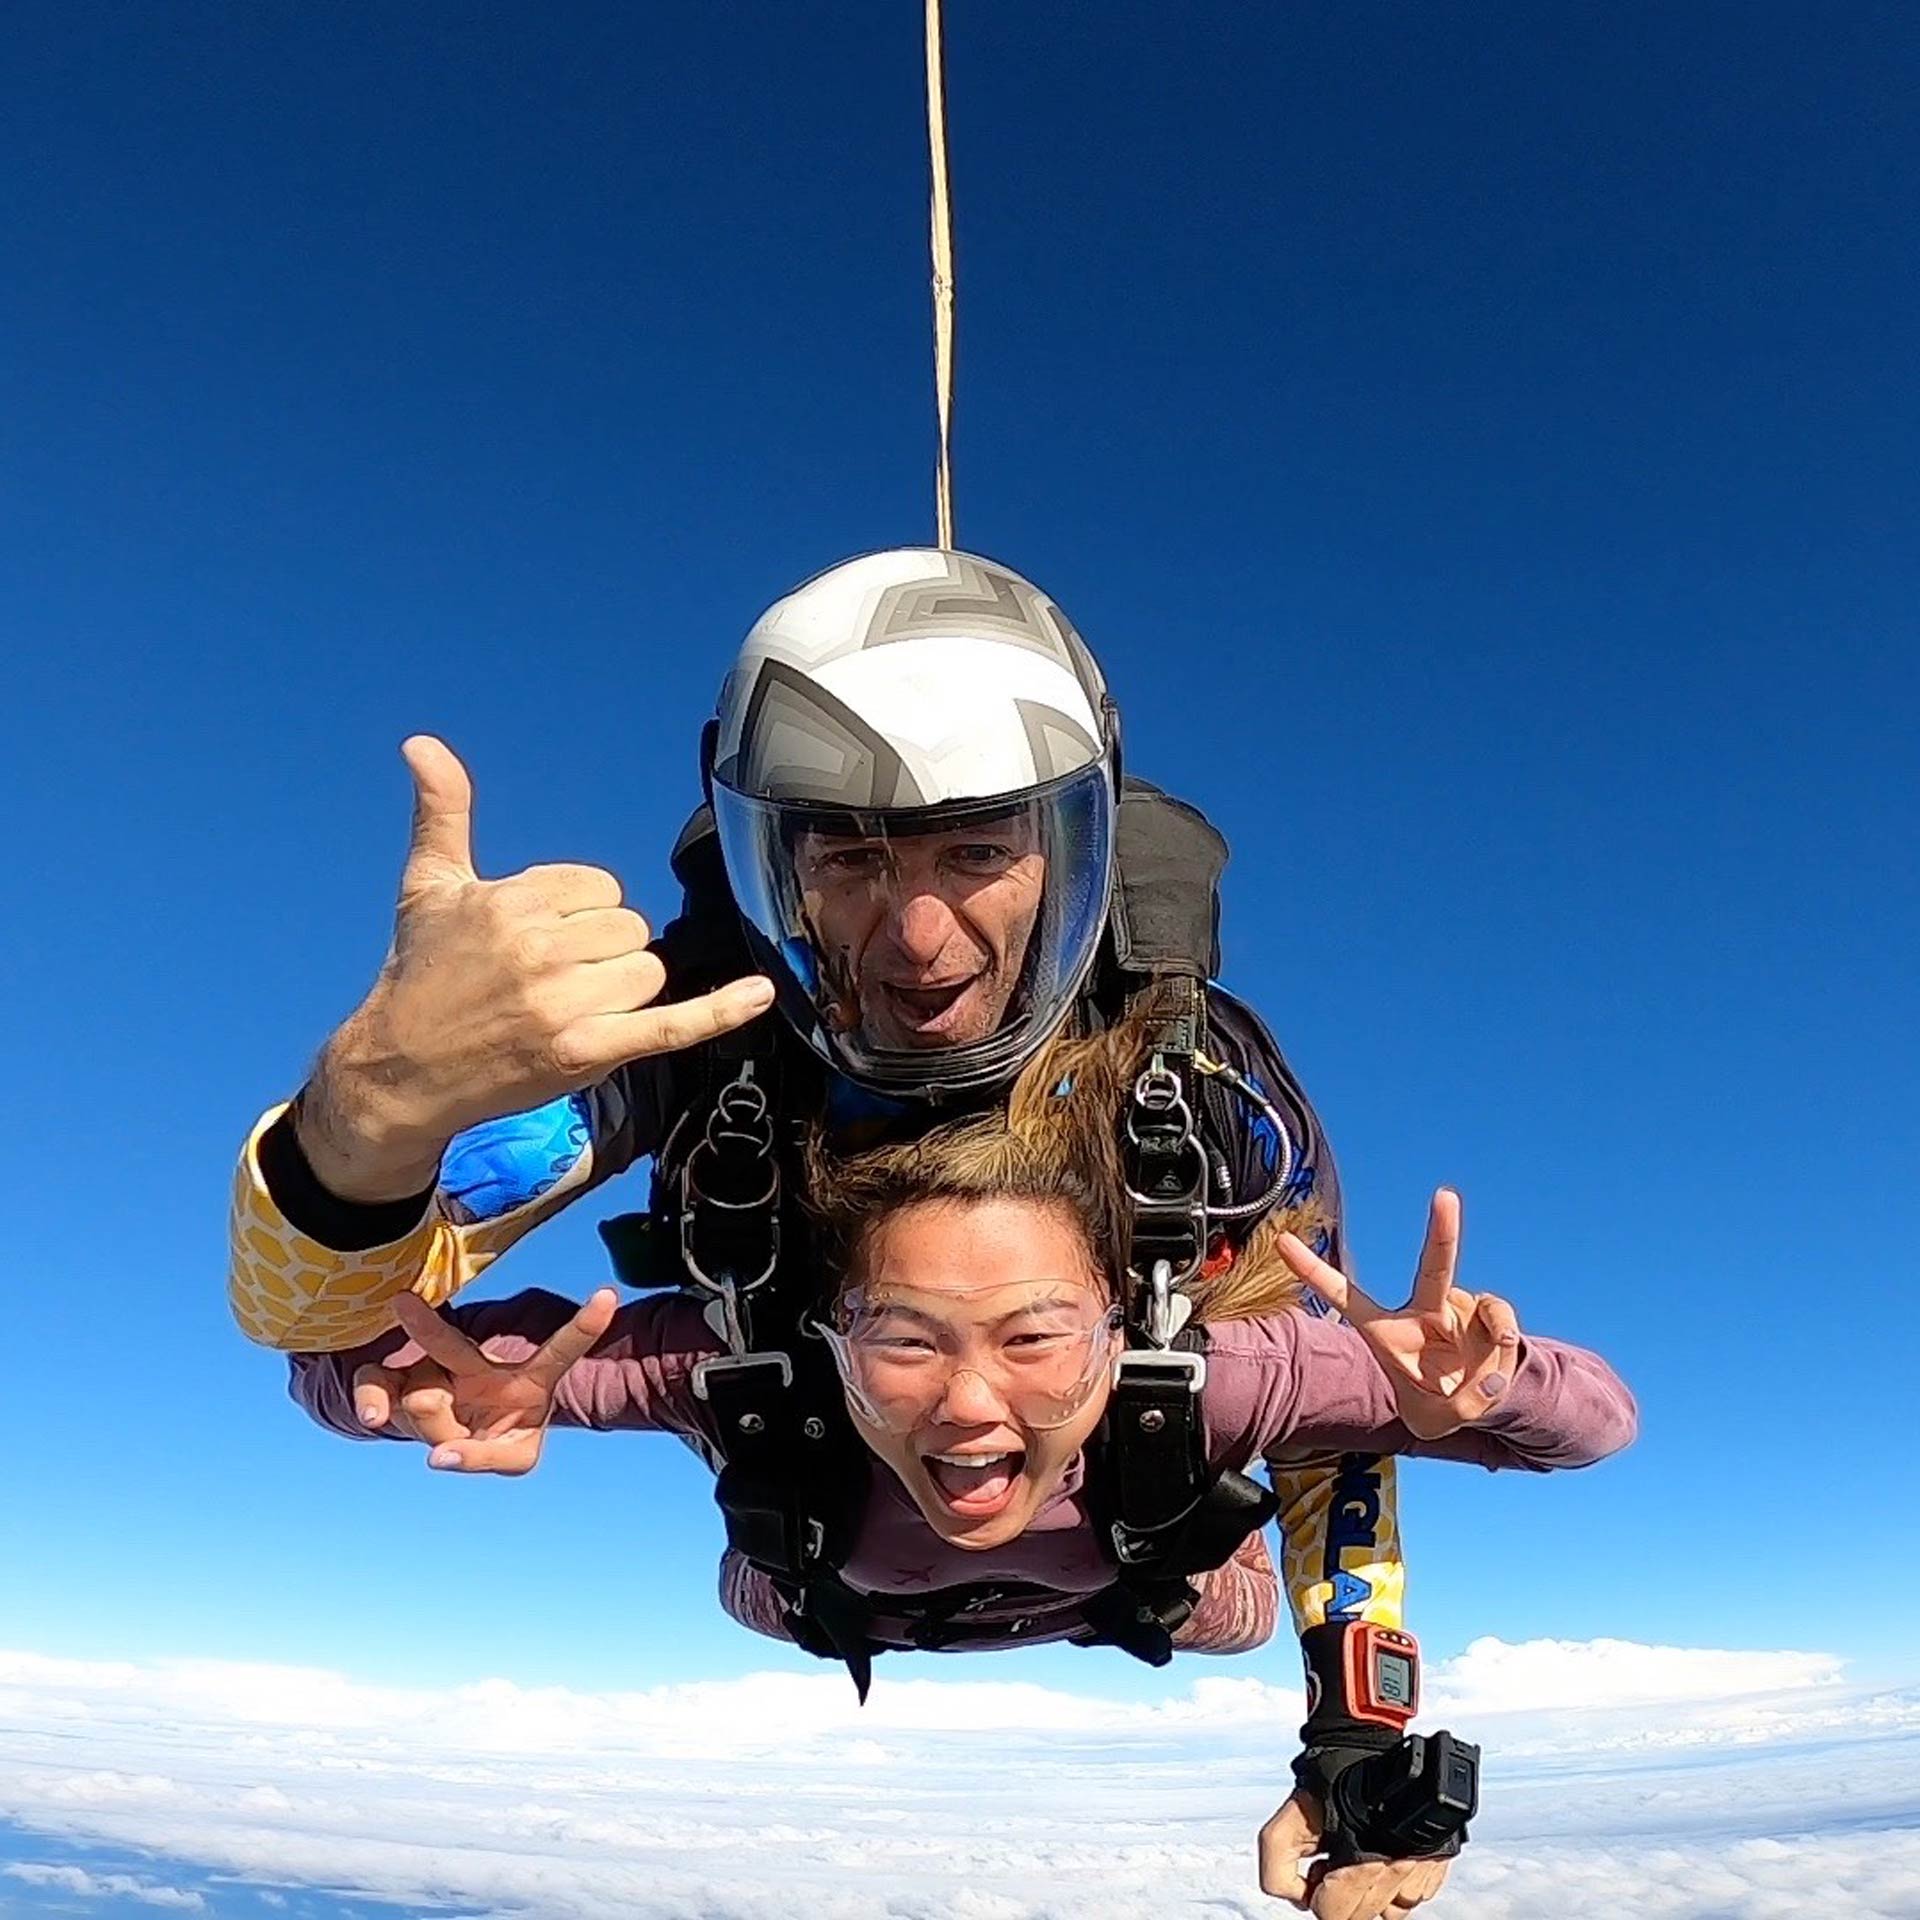 skydiving hand signals